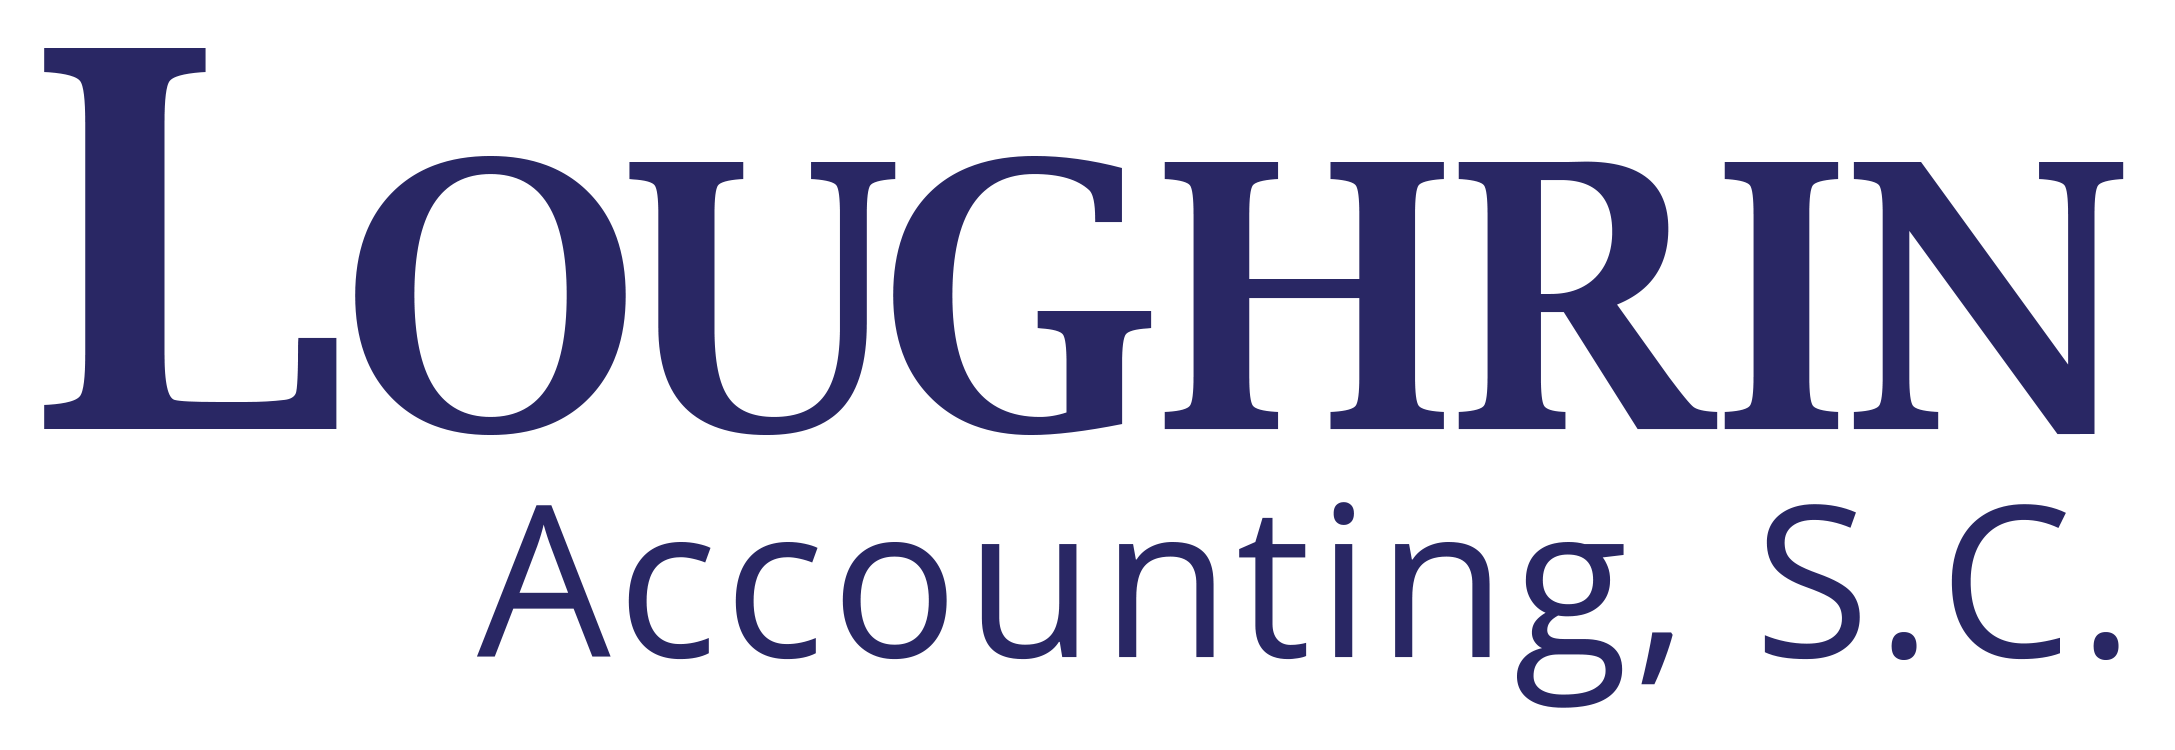 Loughrin Accounting, S.C.